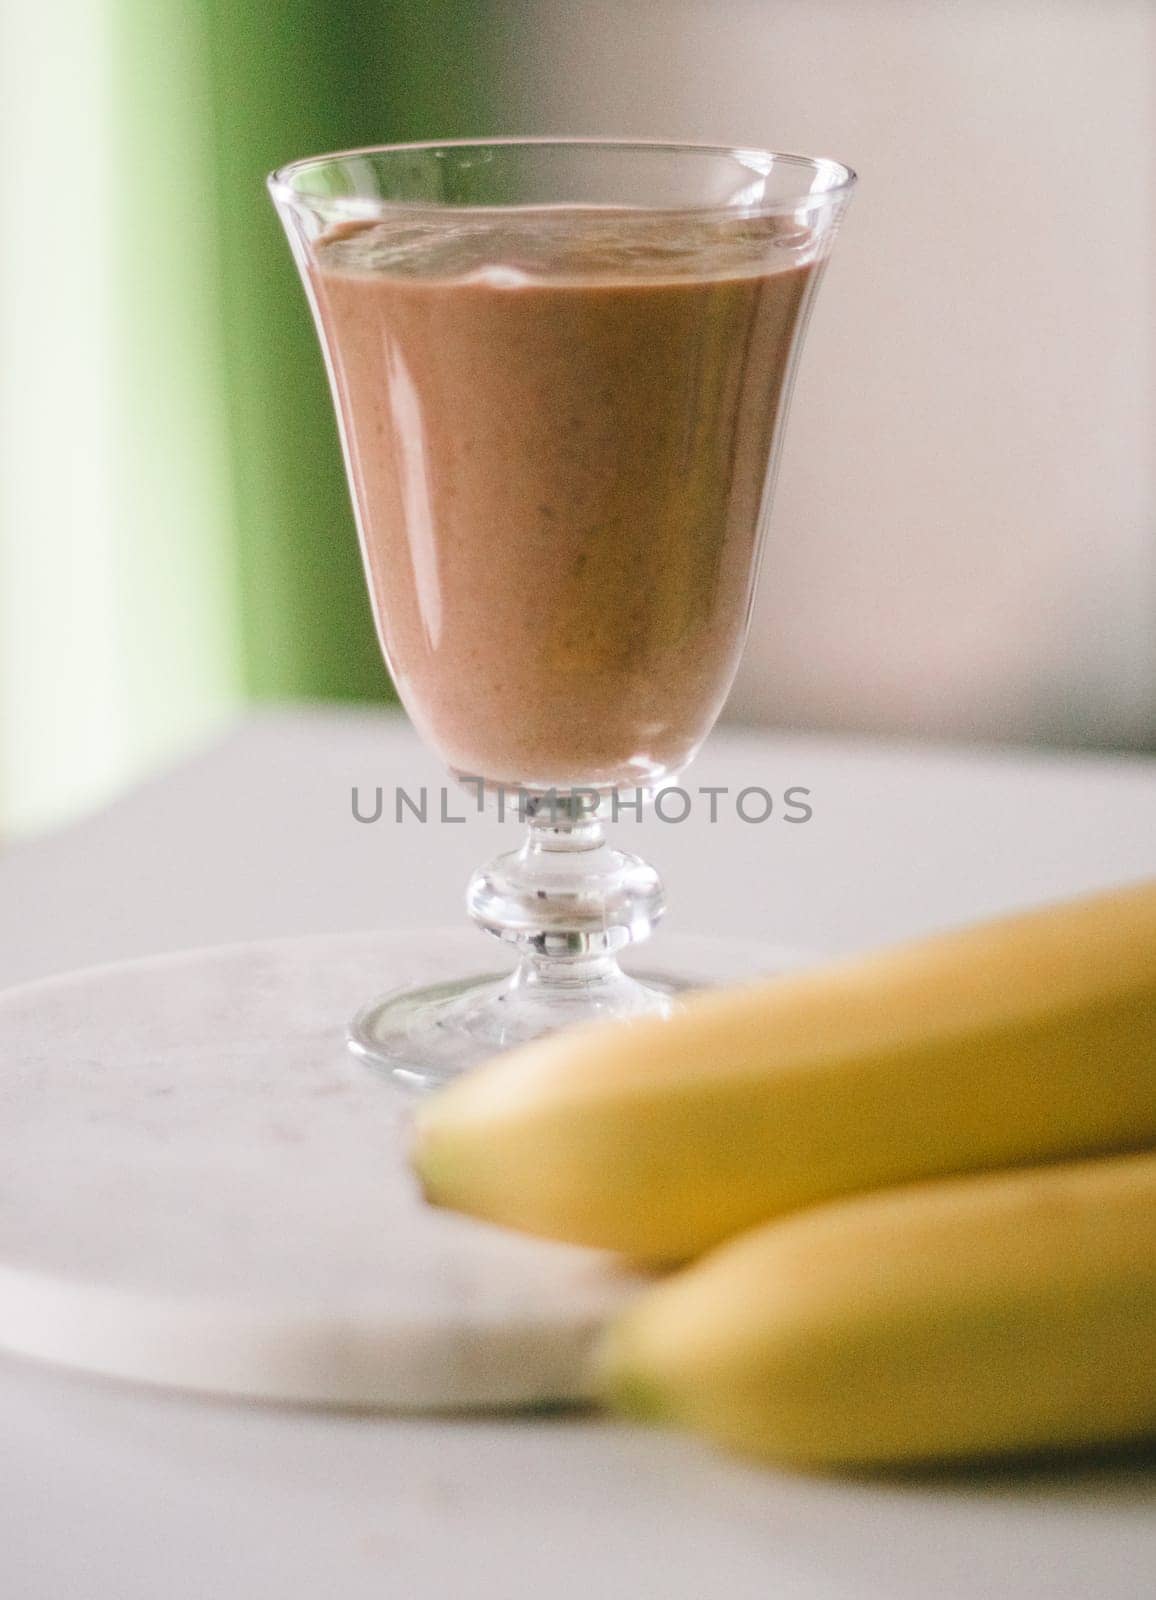 banana cocoa smoothie - healthy eating recipe styled concept by Anneleven